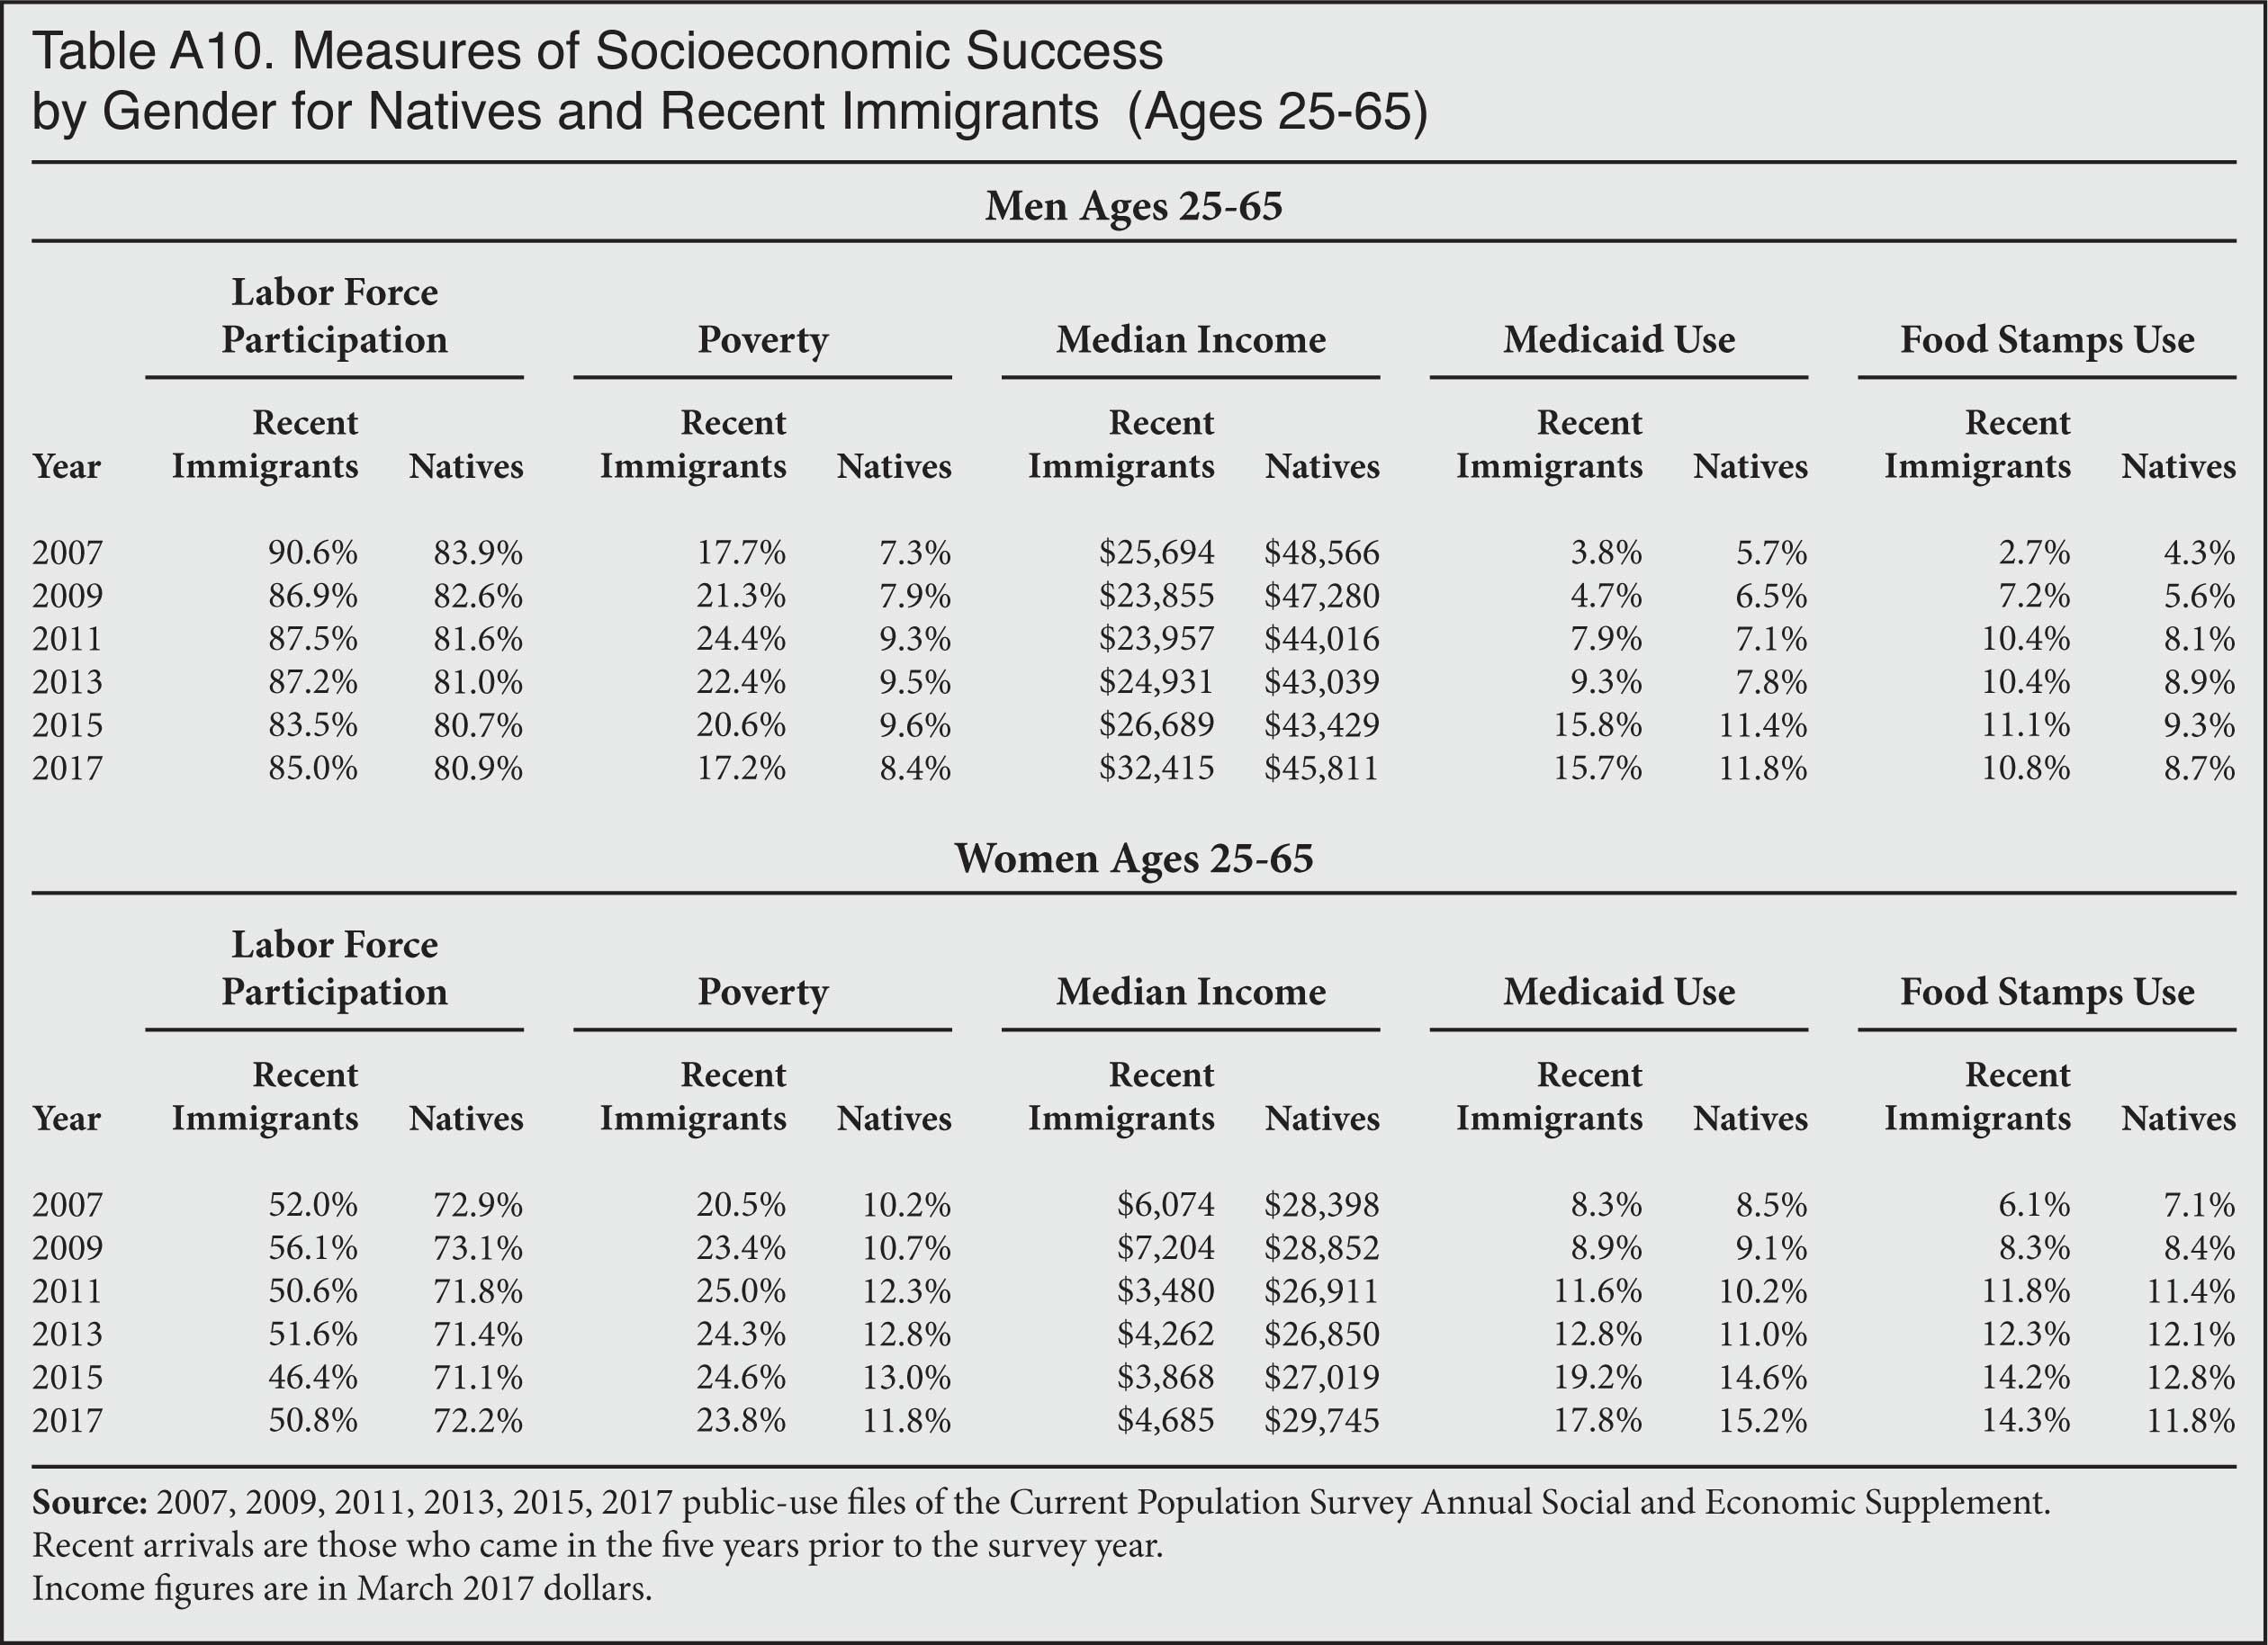 Table: Measures of Socioeconomic Success by Gender for Natives and Recent Immigrants, 2007-2017